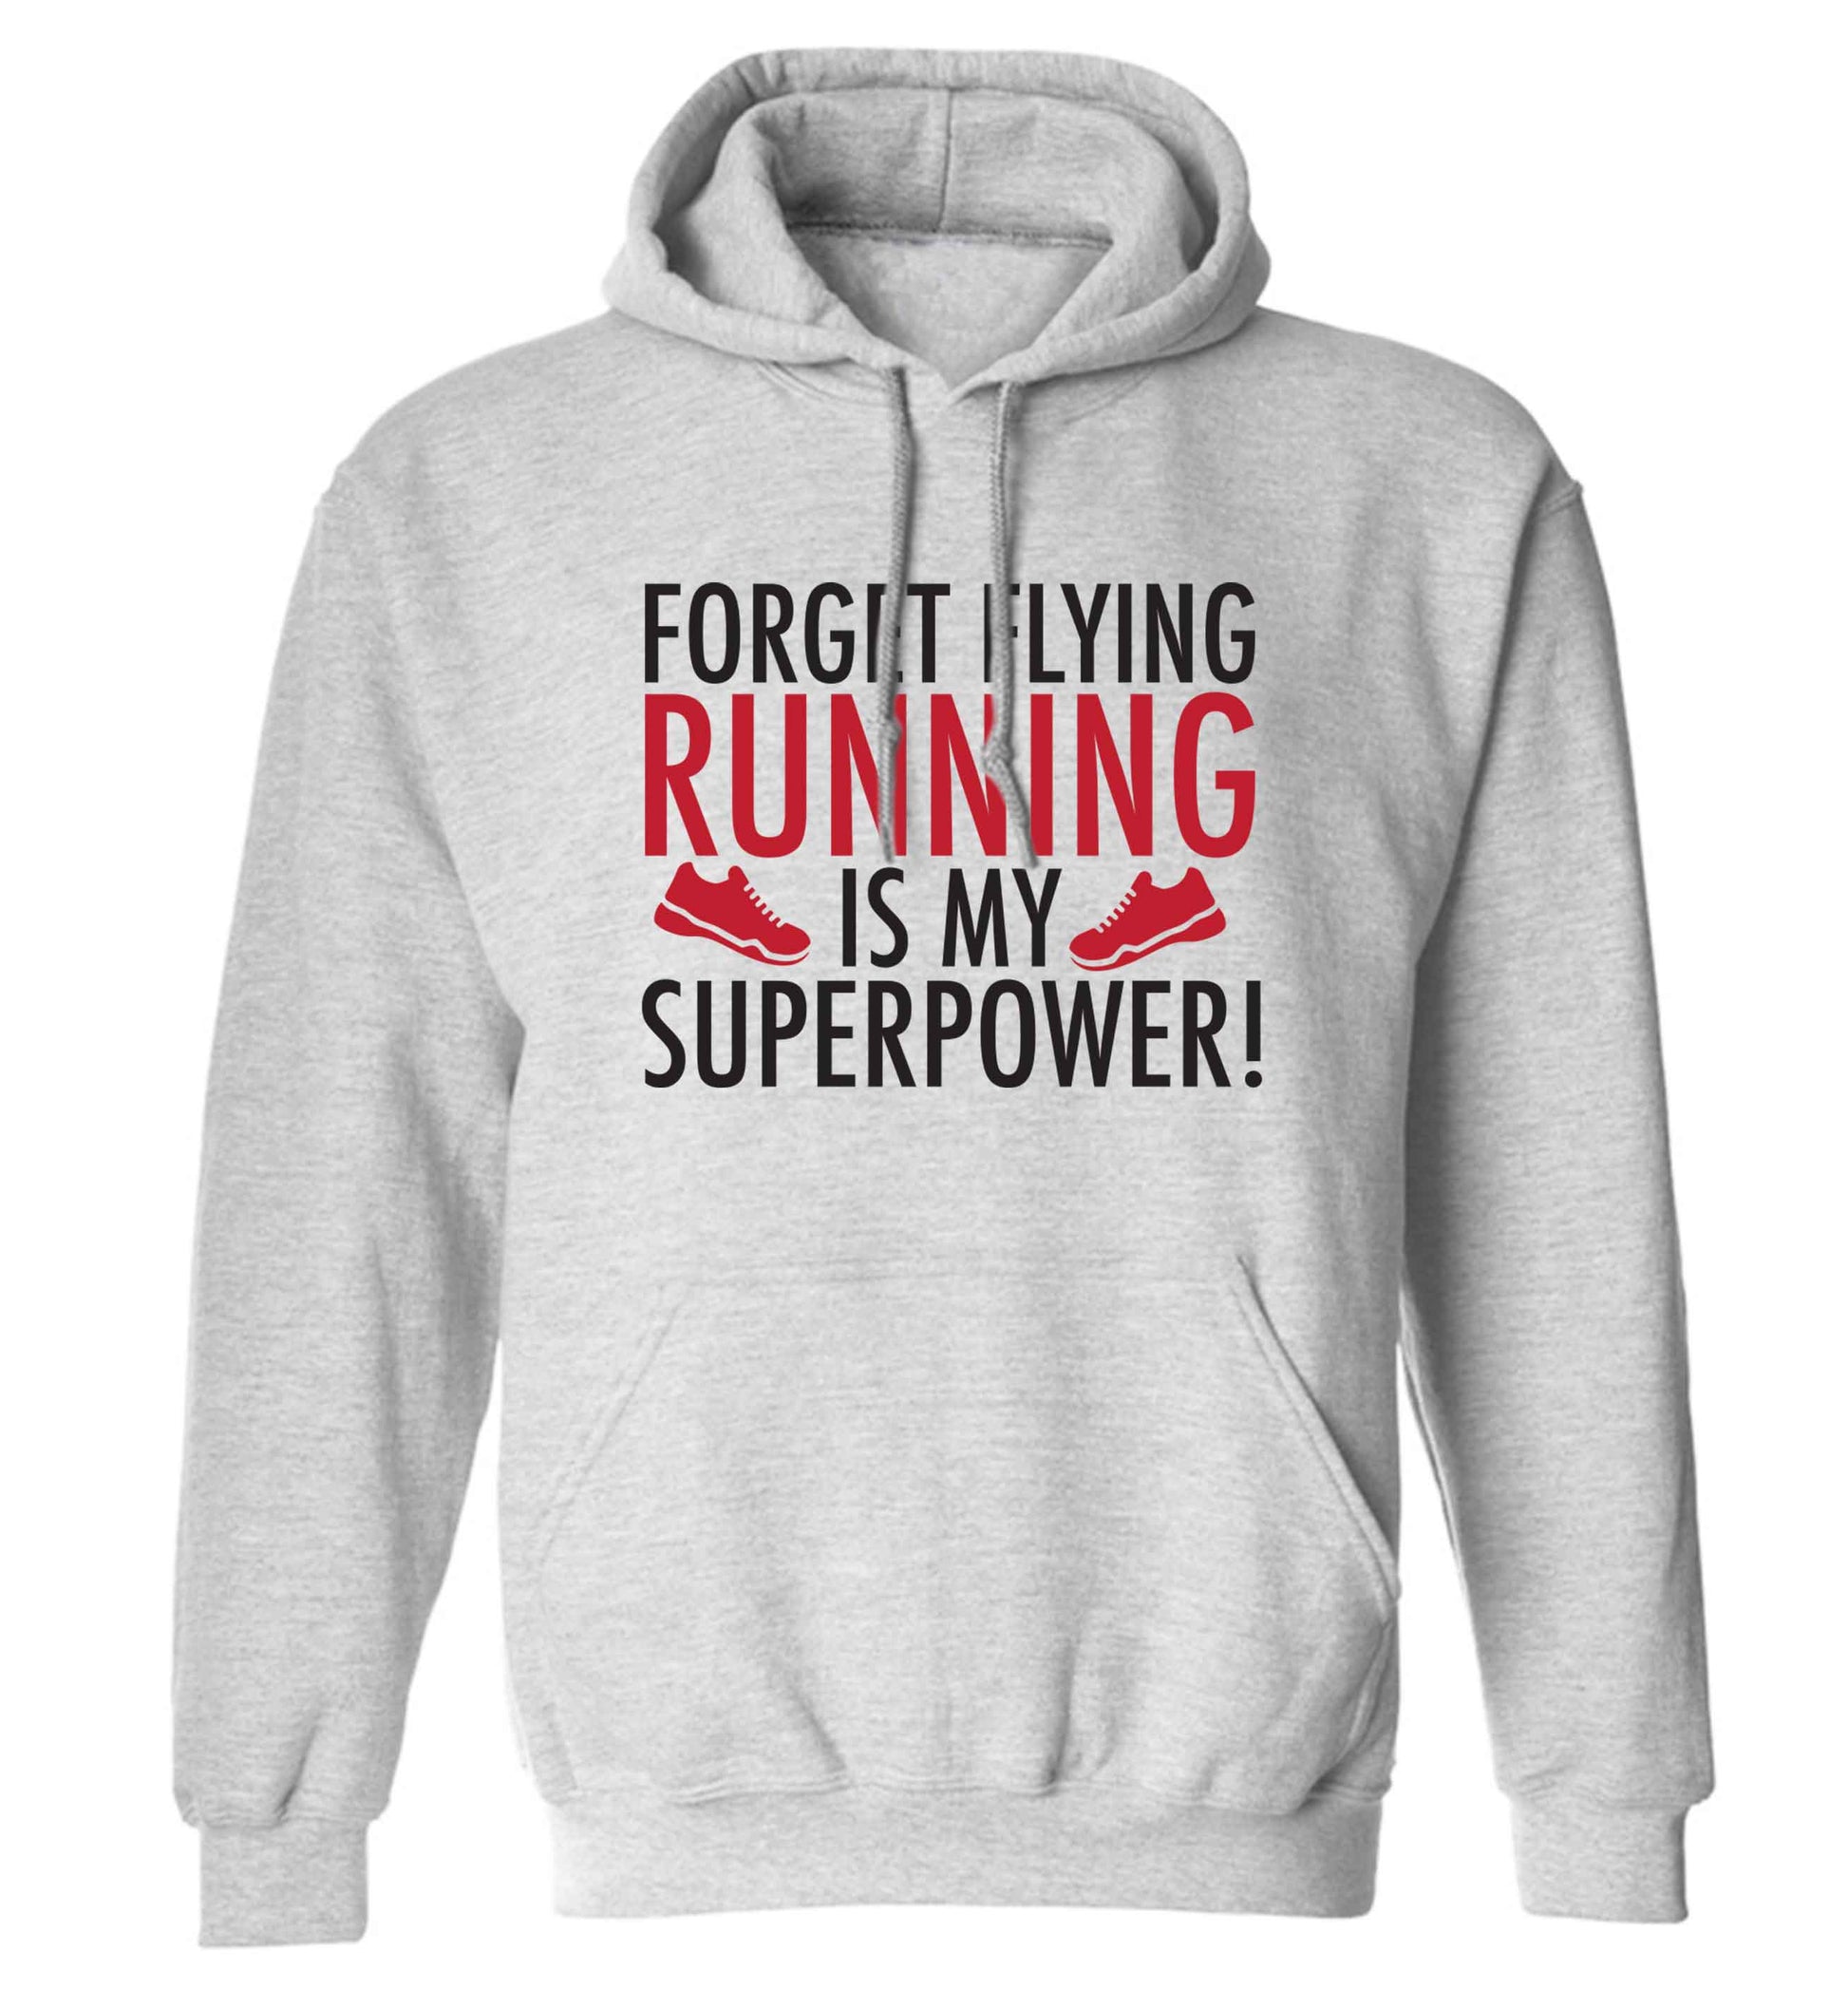 Forget flying running is my superpower adults unisex grey hoodie 2XL